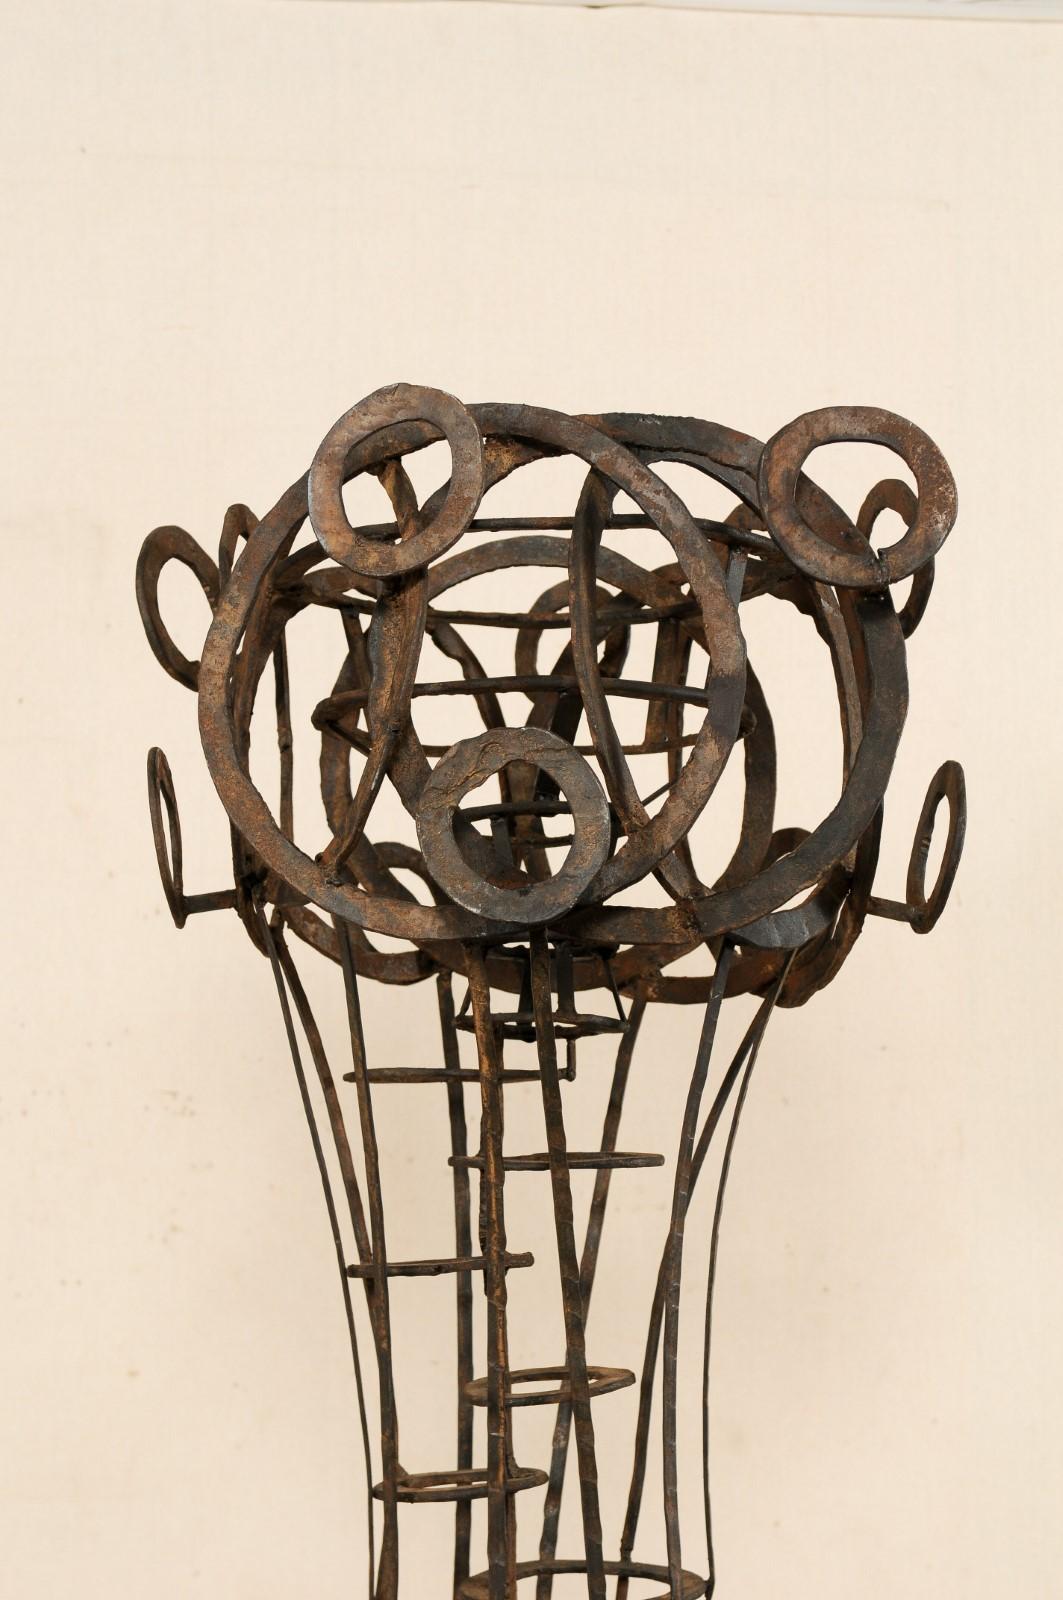 Hand-Crafted Tall French Sculptural Iron Abstract Art Piece, circa 1930s-1940s For Sale